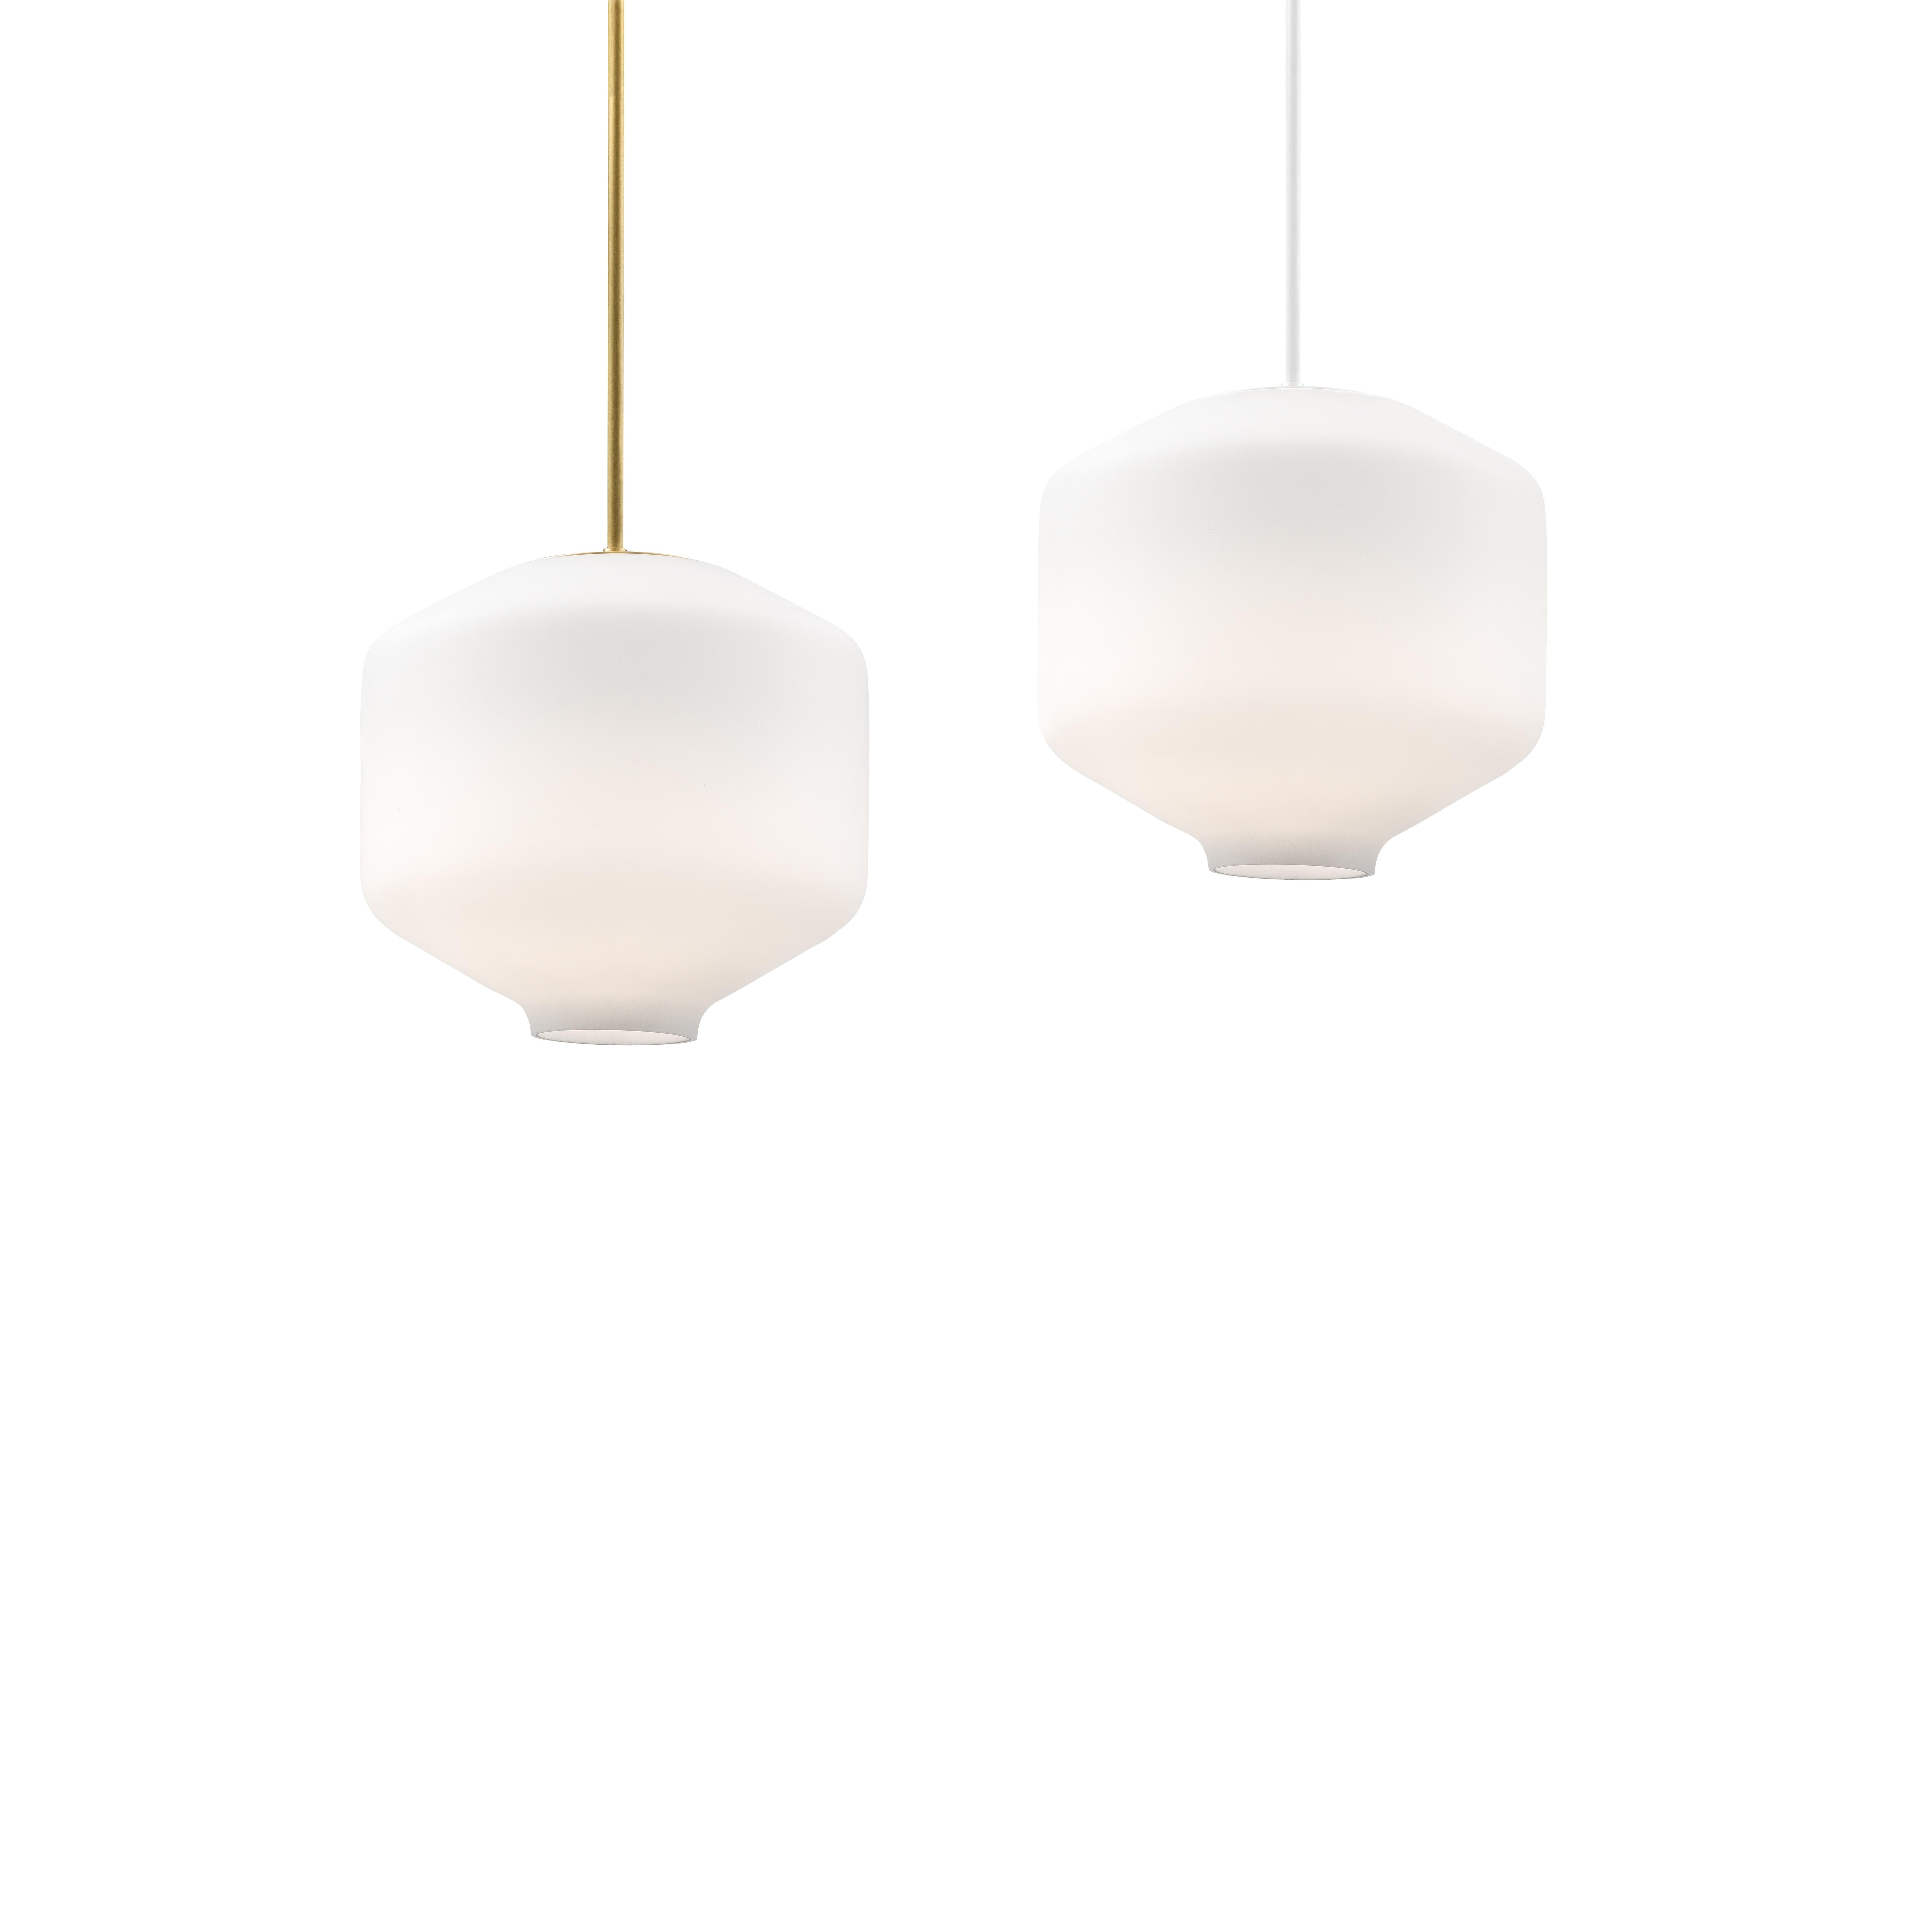 GA7 is a classical globe luminaire and consists of a mouthblown, three layered opaque glass.

Originally designed to enlighten the corridors of the basement at the Woodland Cemetary.

The frosted glass in collaboration with the centered light